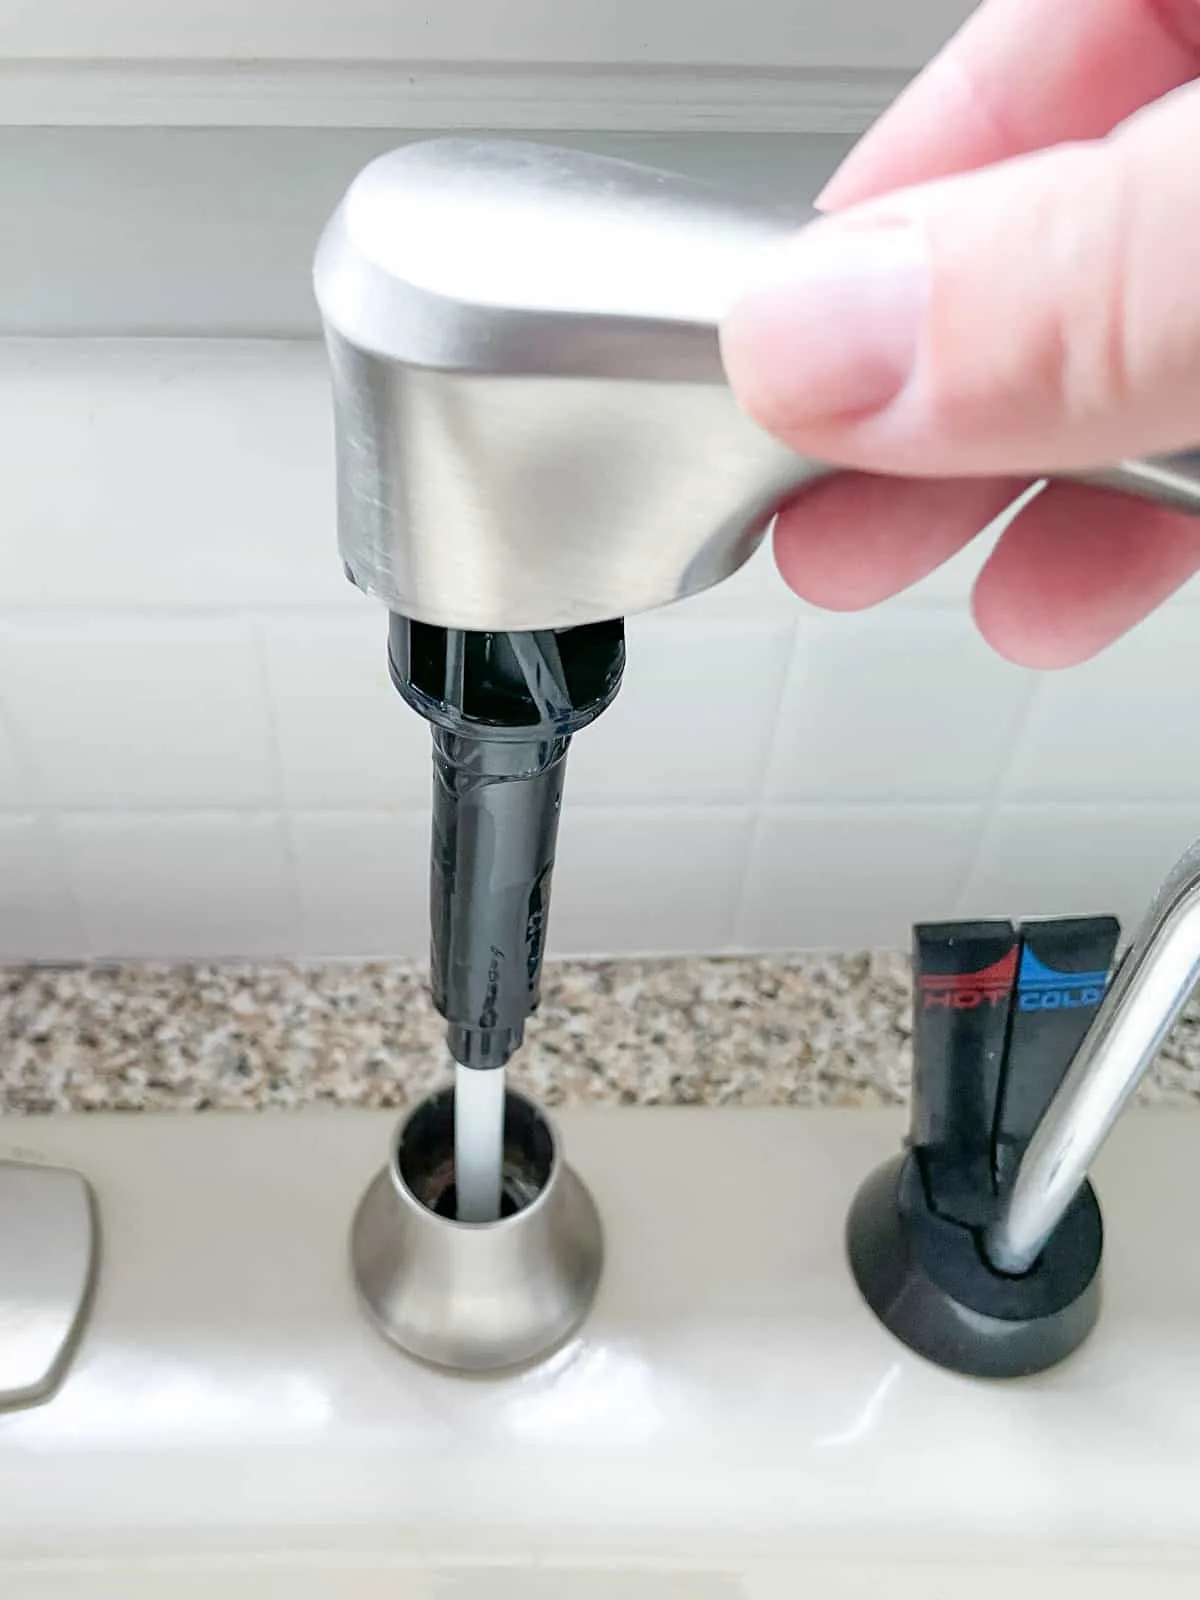 How to Install a Kitchen Dish Soap Dispenser